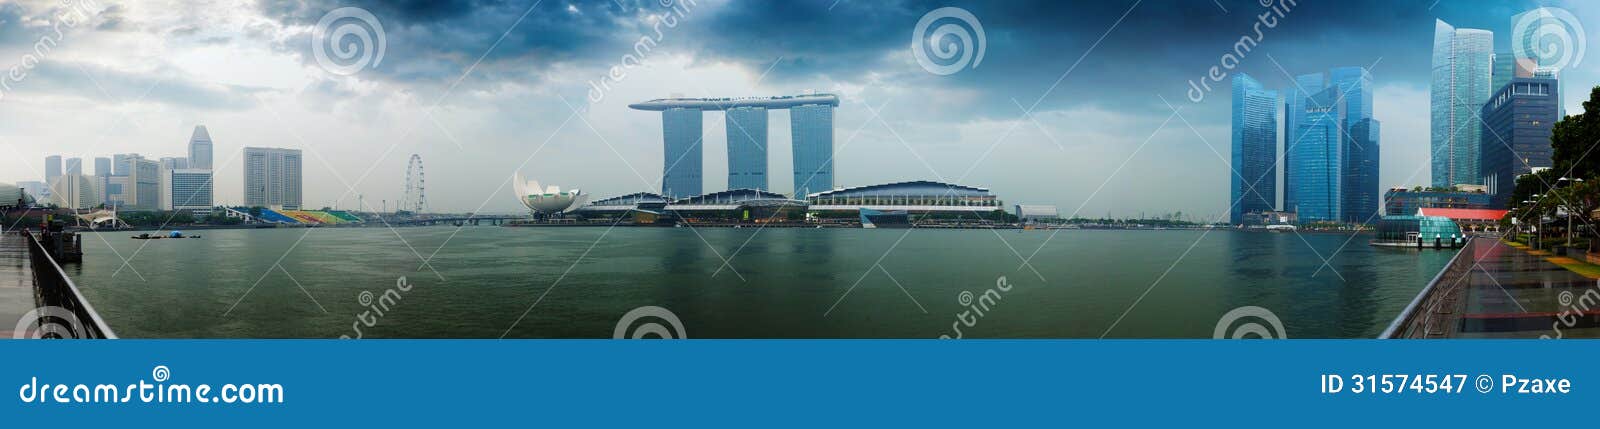 singapore skyline - hotels and offices with reflection panorama